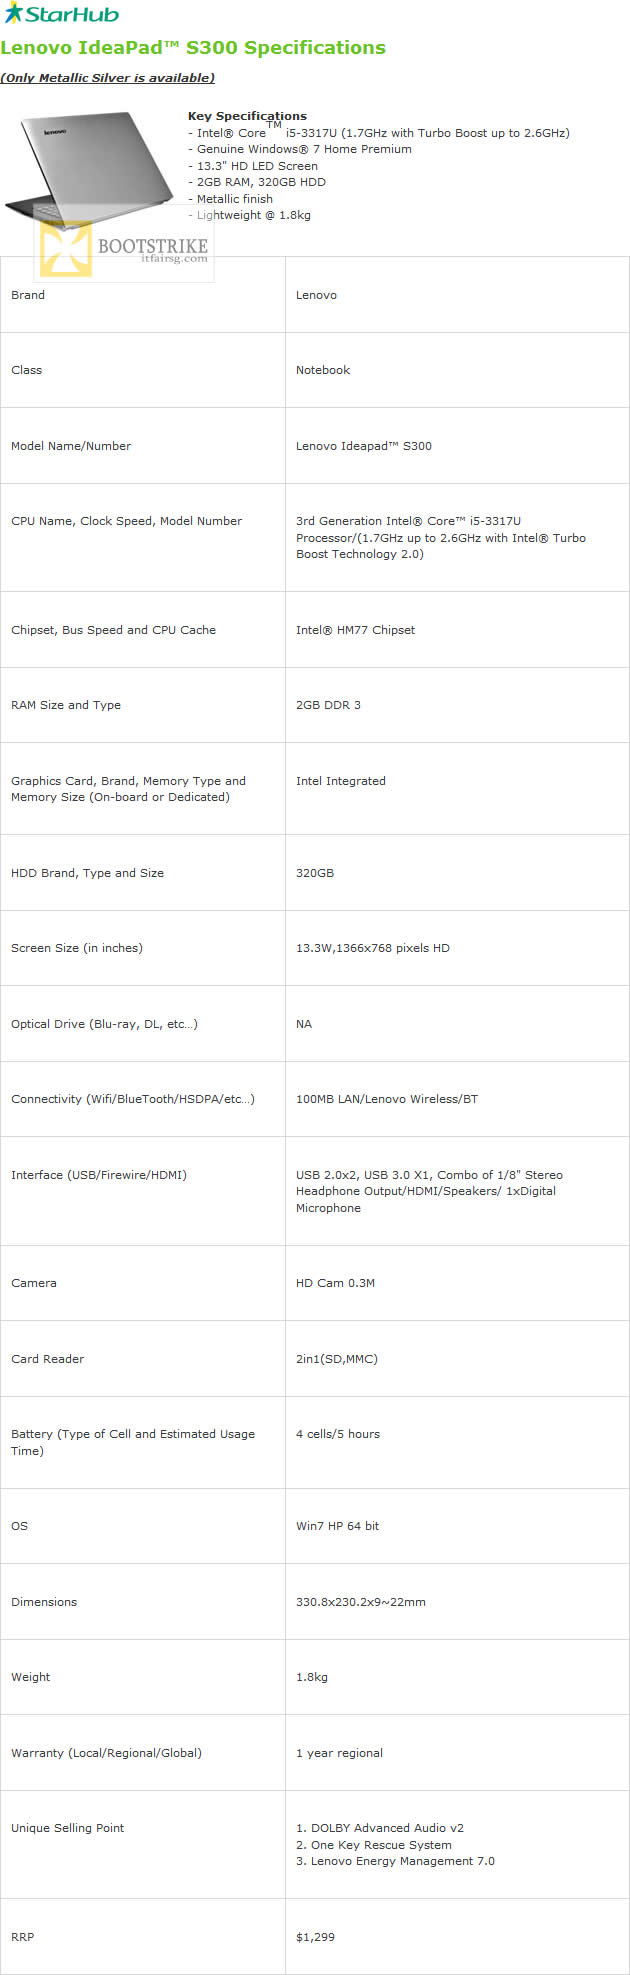 COMEX 2012 price list image brochure of Starhub Free Lenovo IdeaPad S300 Notebook Specifications